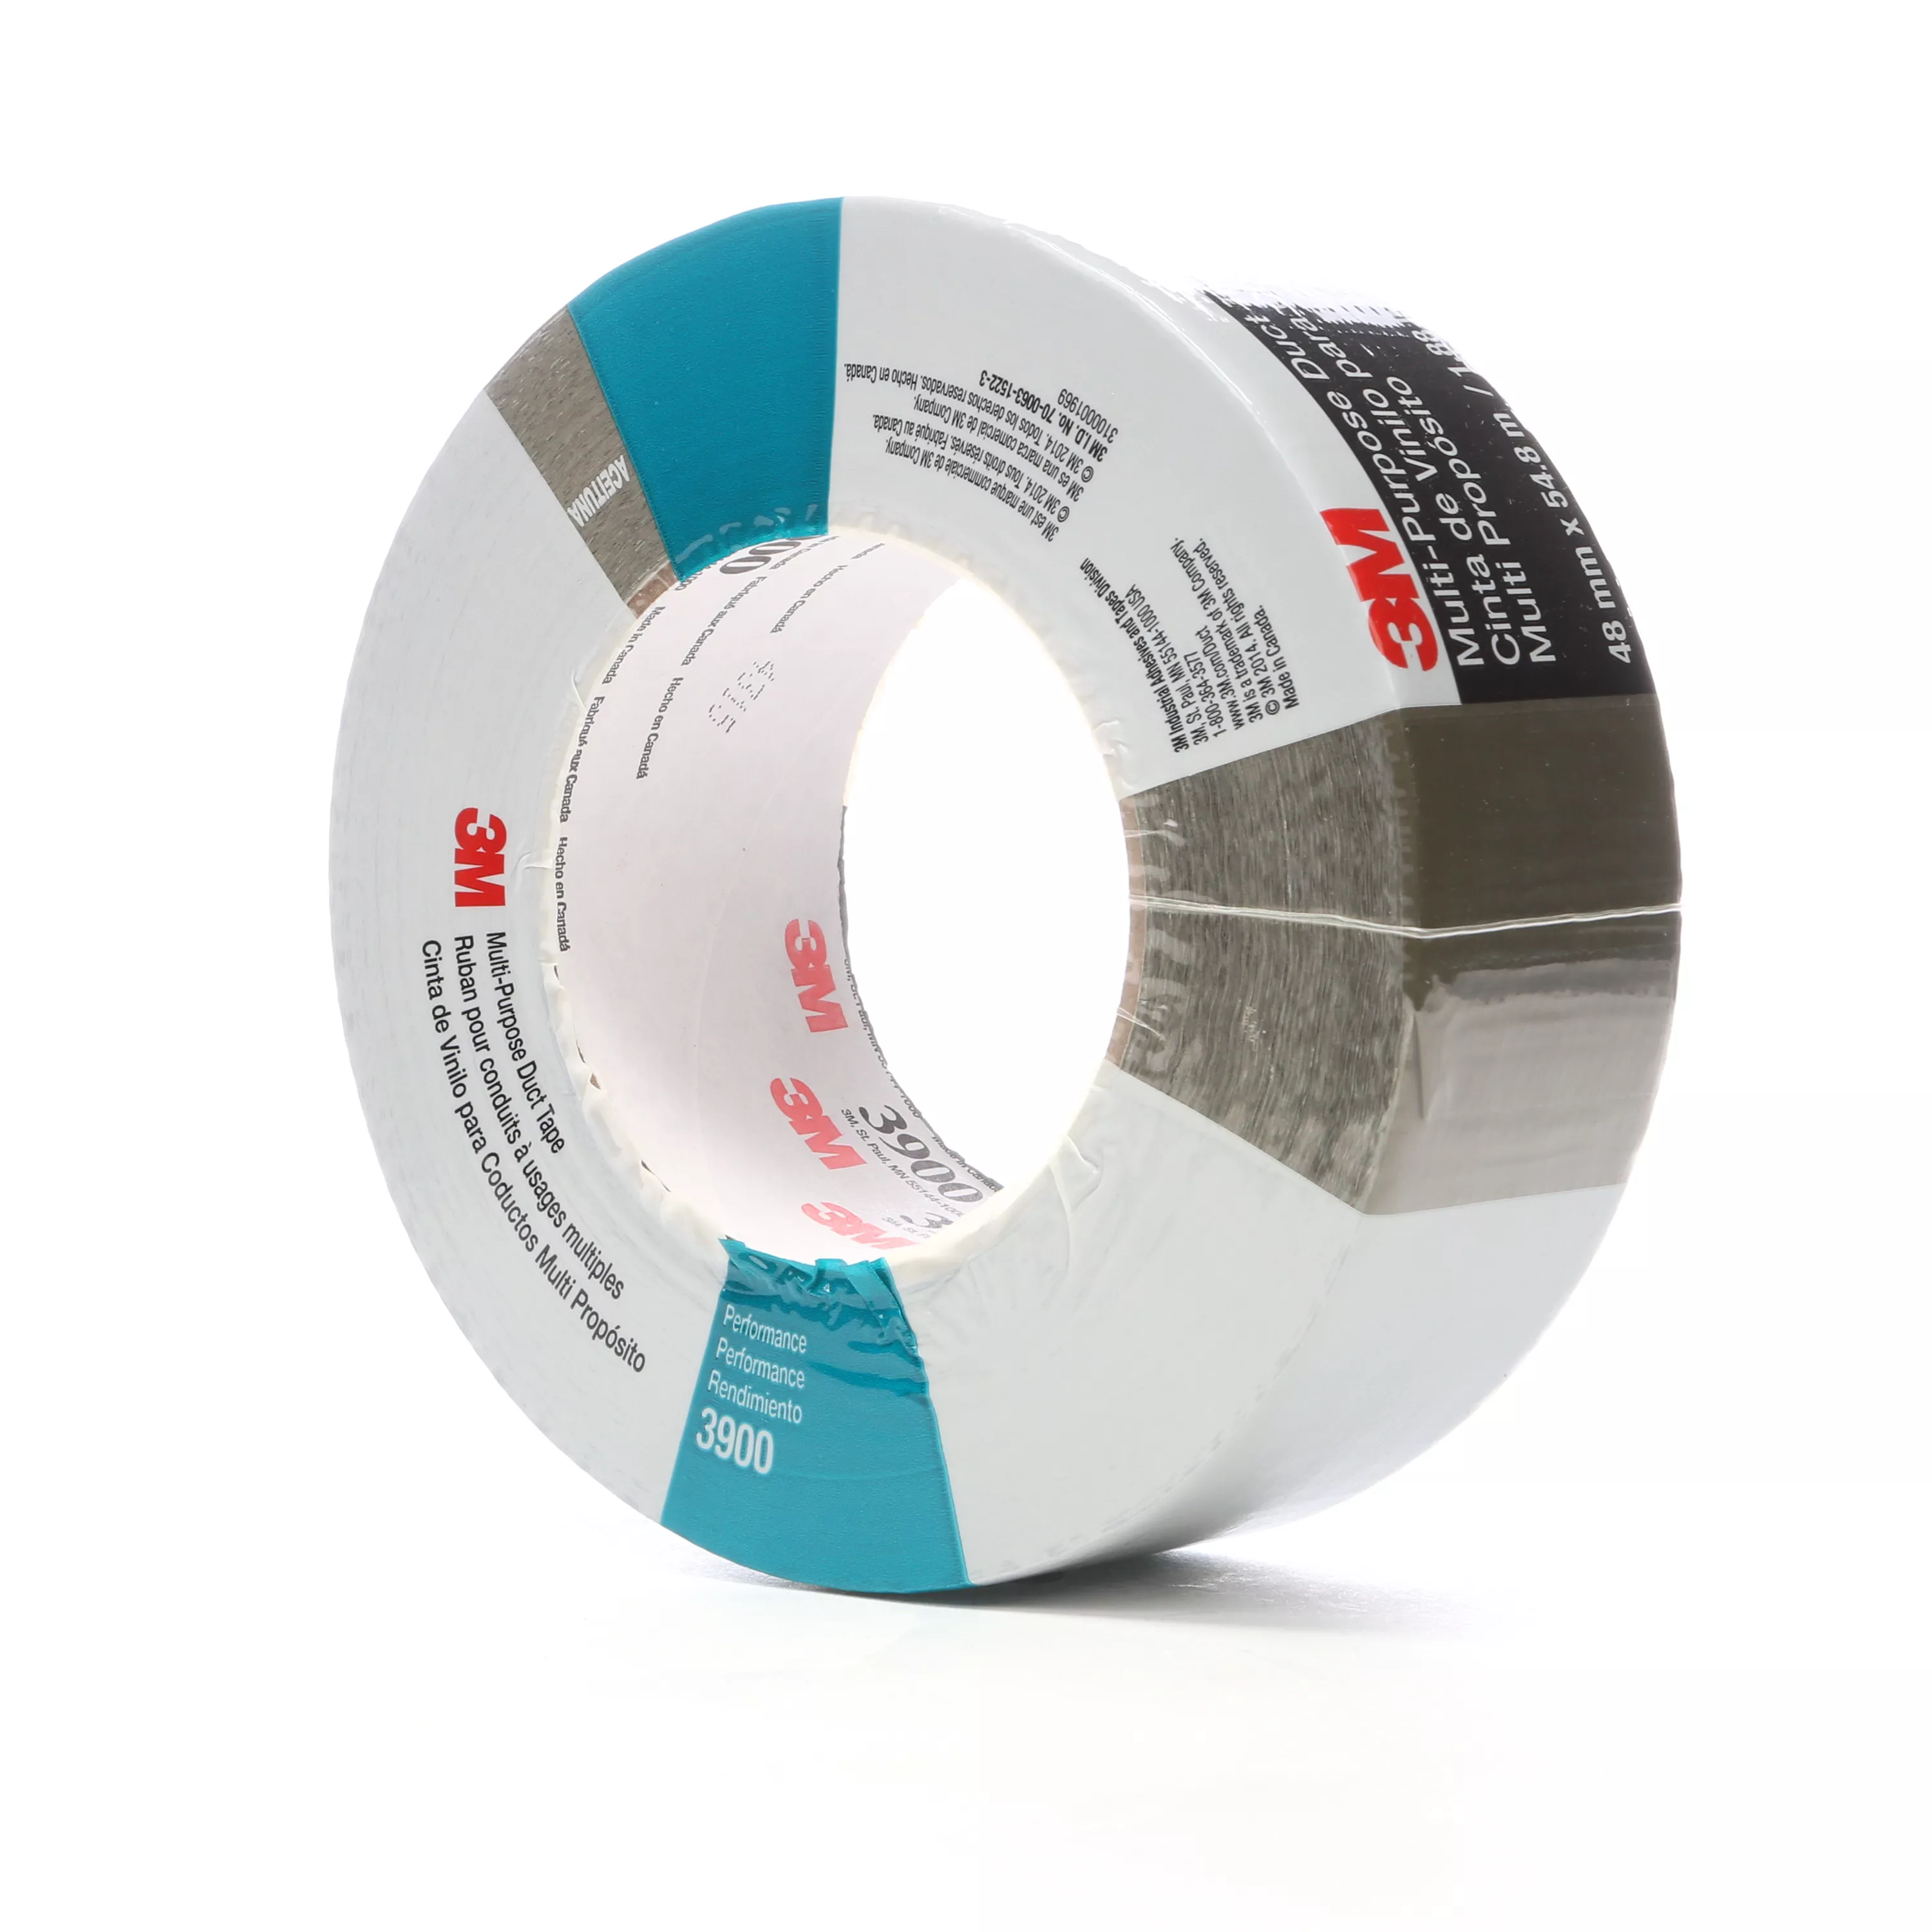 3M™ Multi-Purpose Duct Tape 3900, Olive, 48 mm x 54.8 m, 7.6 mil, 24
Roll/Case, Individually Wrapped Conveniently Packaged